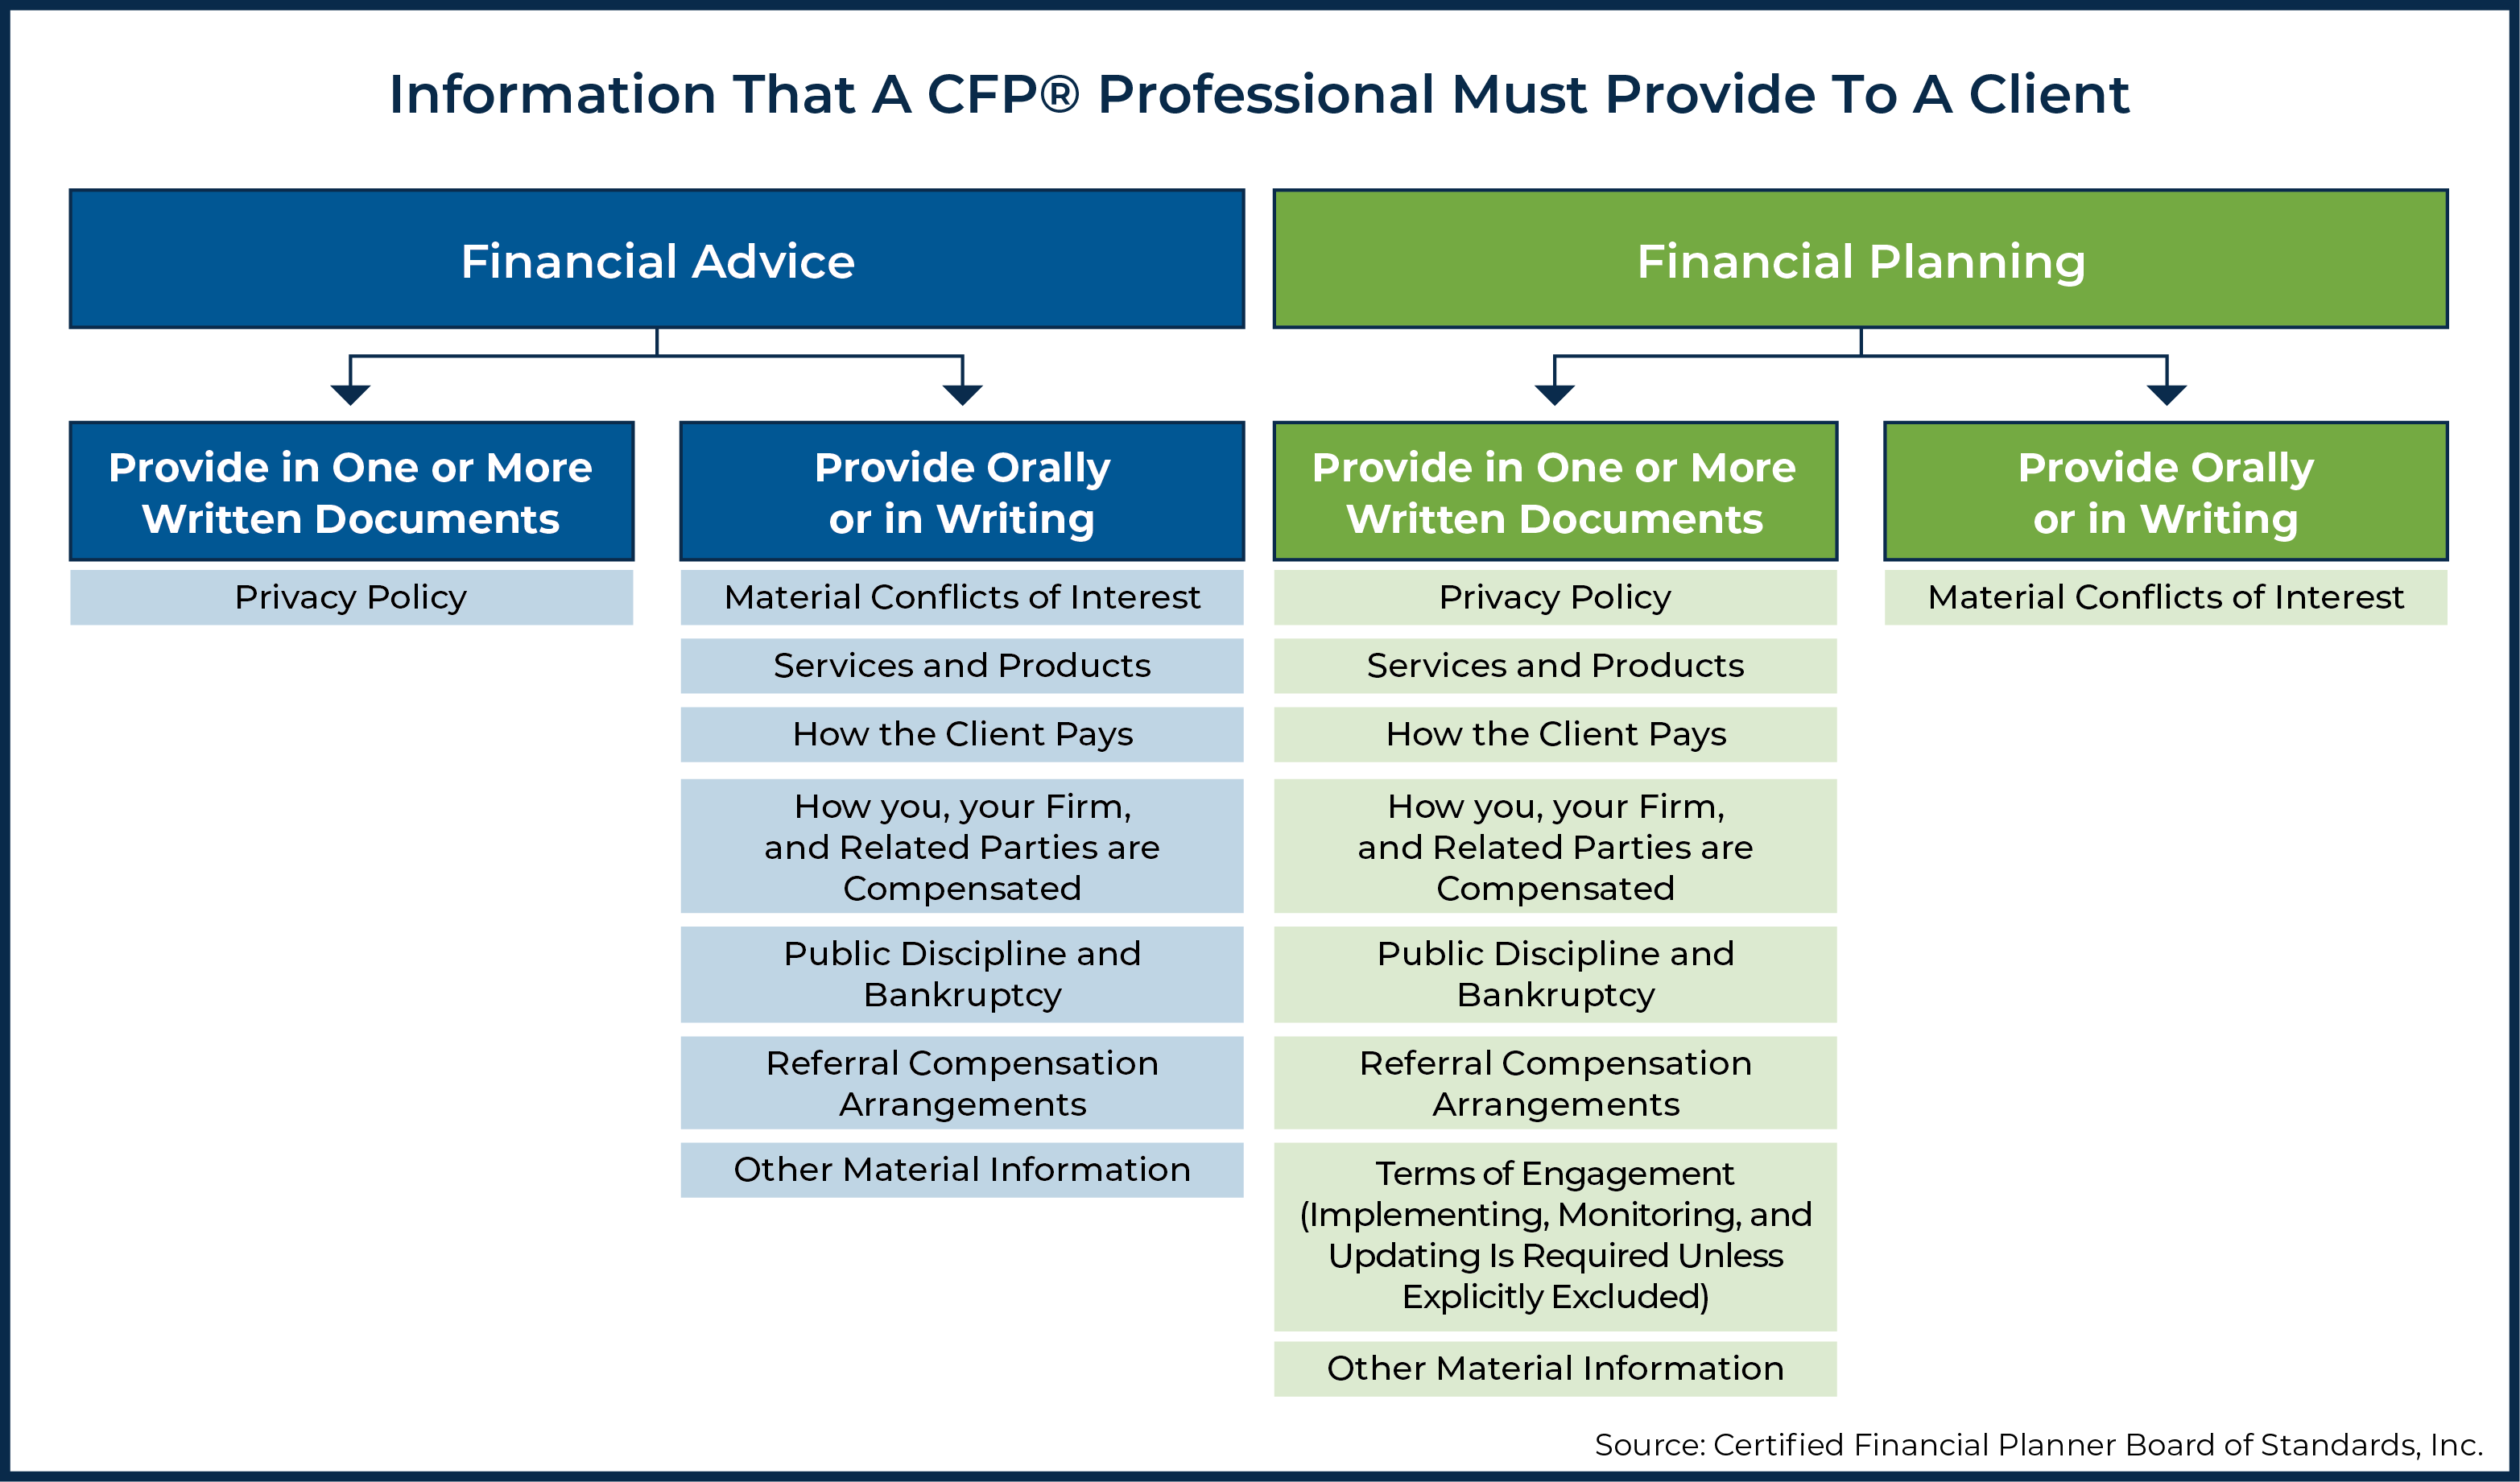 Information That A CFP Professional Must Provide To A Client